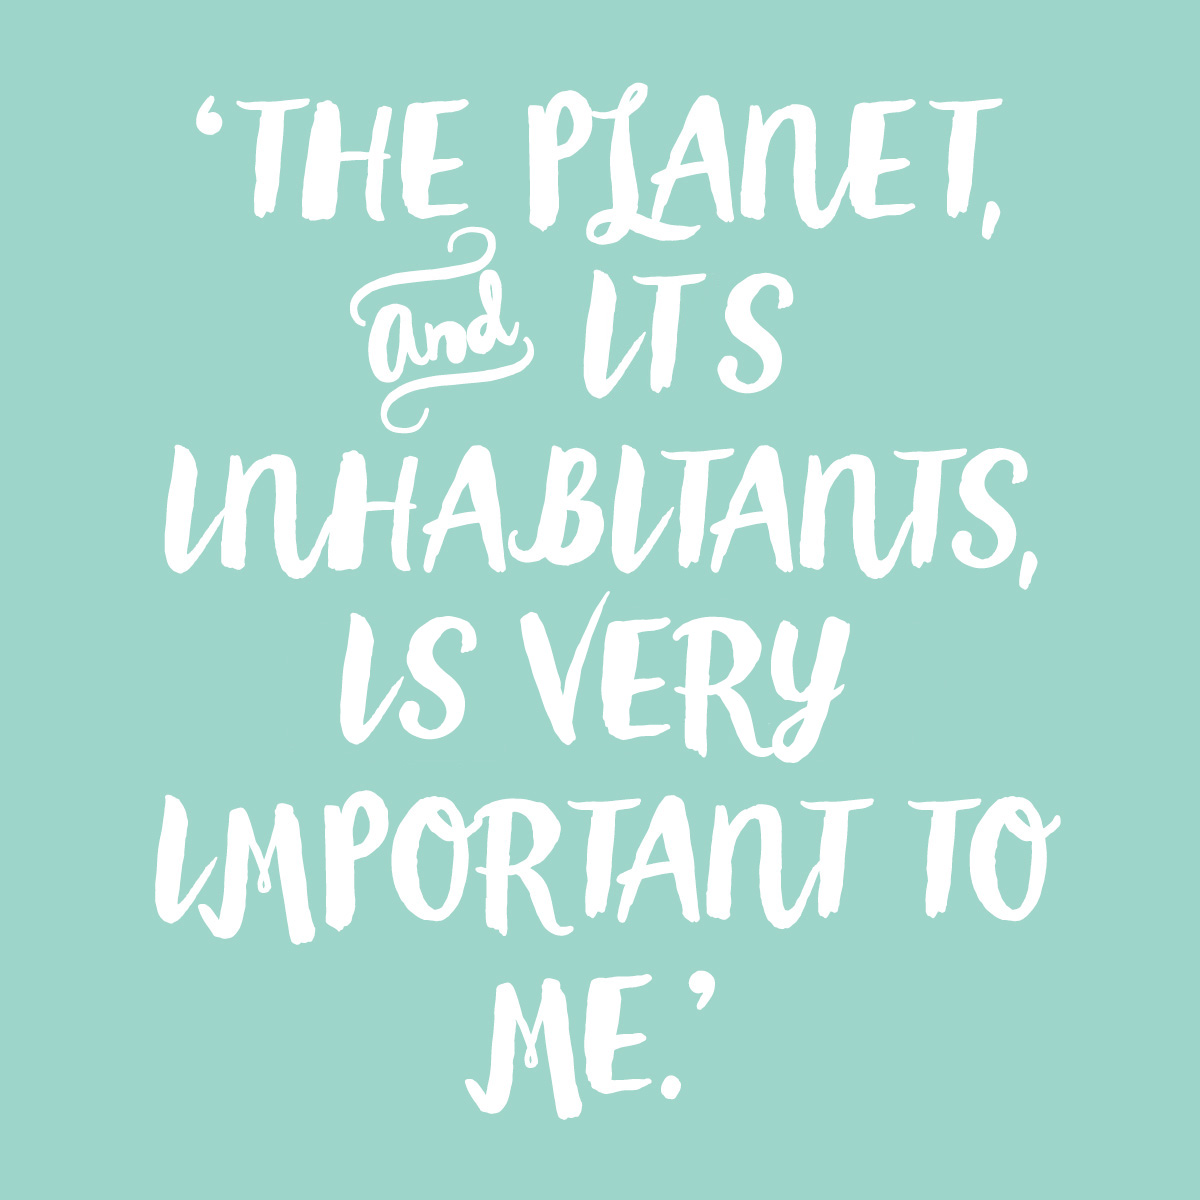 The planet is important to me